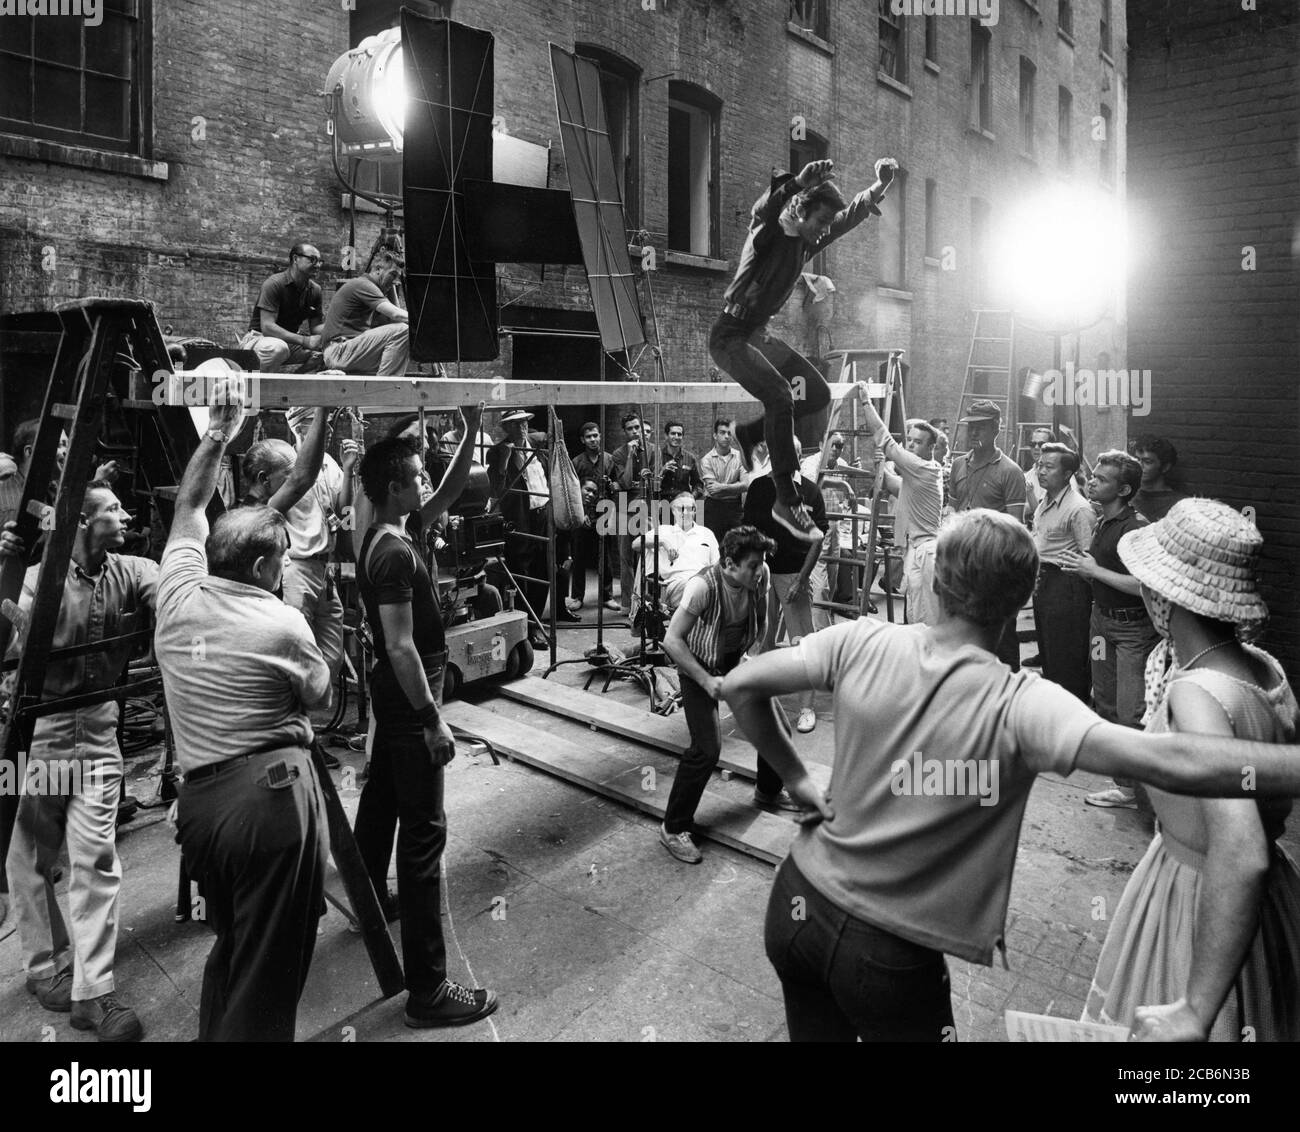 Director ROBERT WISE (seated at centre) on set candid directing GEORGE CHAKIRIS in dance number on location in New York for WEST SIDE STORY 1961 directors JEROME ROBBINS and  ROBERT WISE music Leonard Bernstein lyrics Stephen Sondheim A Robert Wise Production / The Mirisch Corporation / United Artists Stock Photo